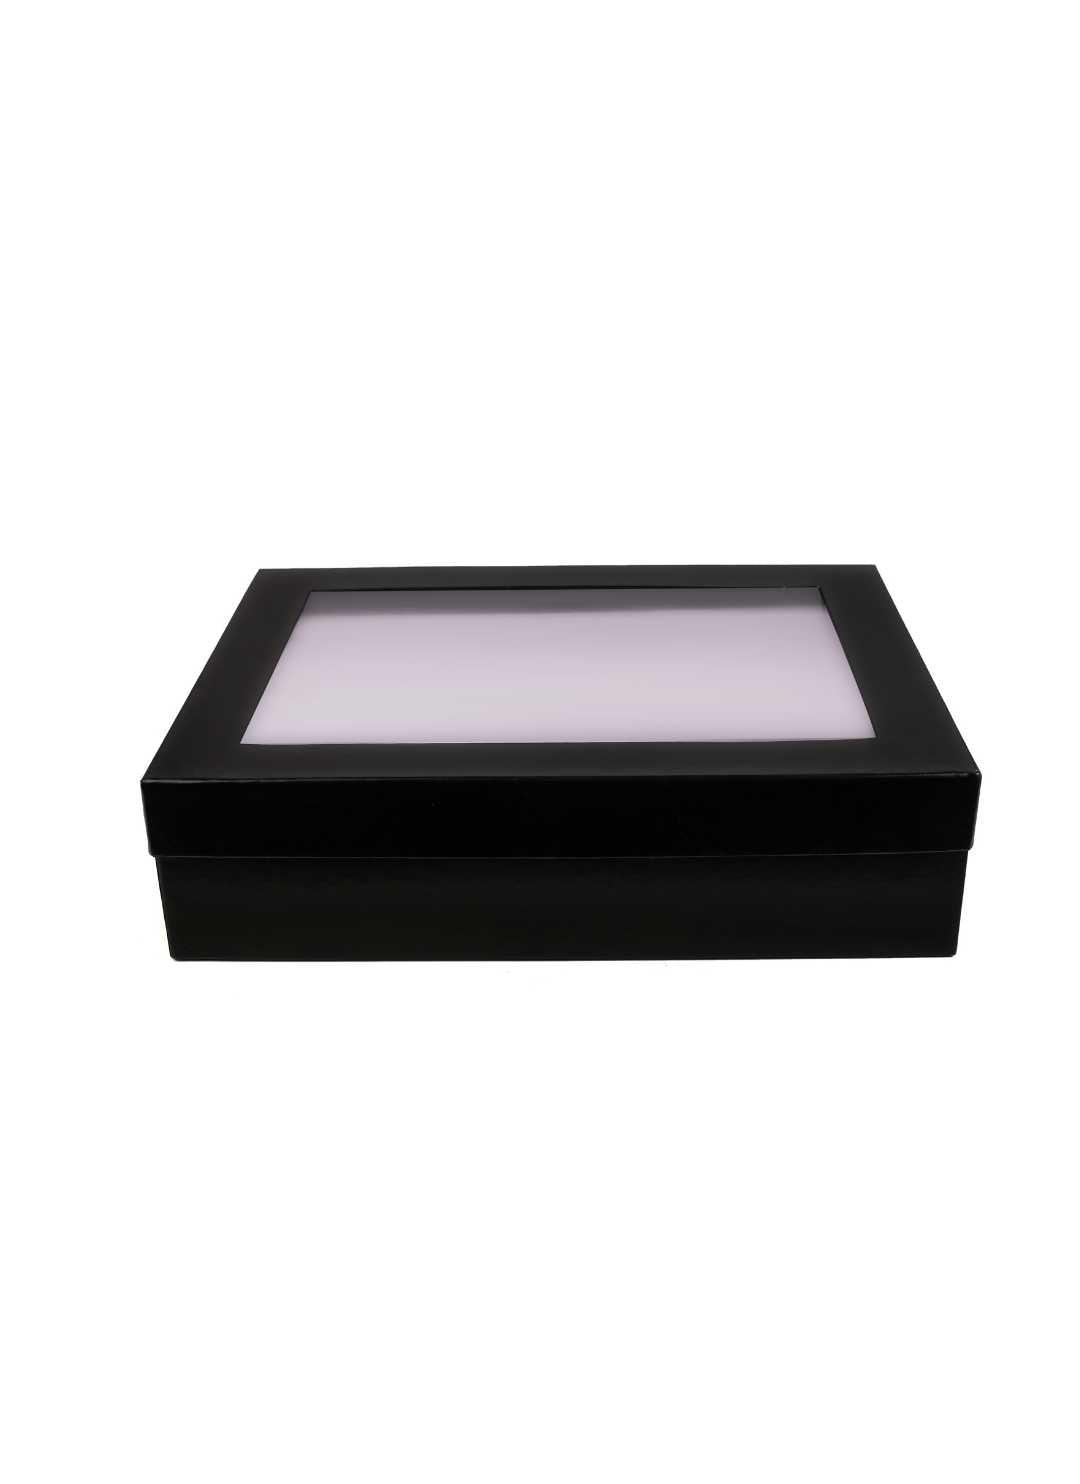 Black Color Window Box For Gifts Packaging - BoxGhar